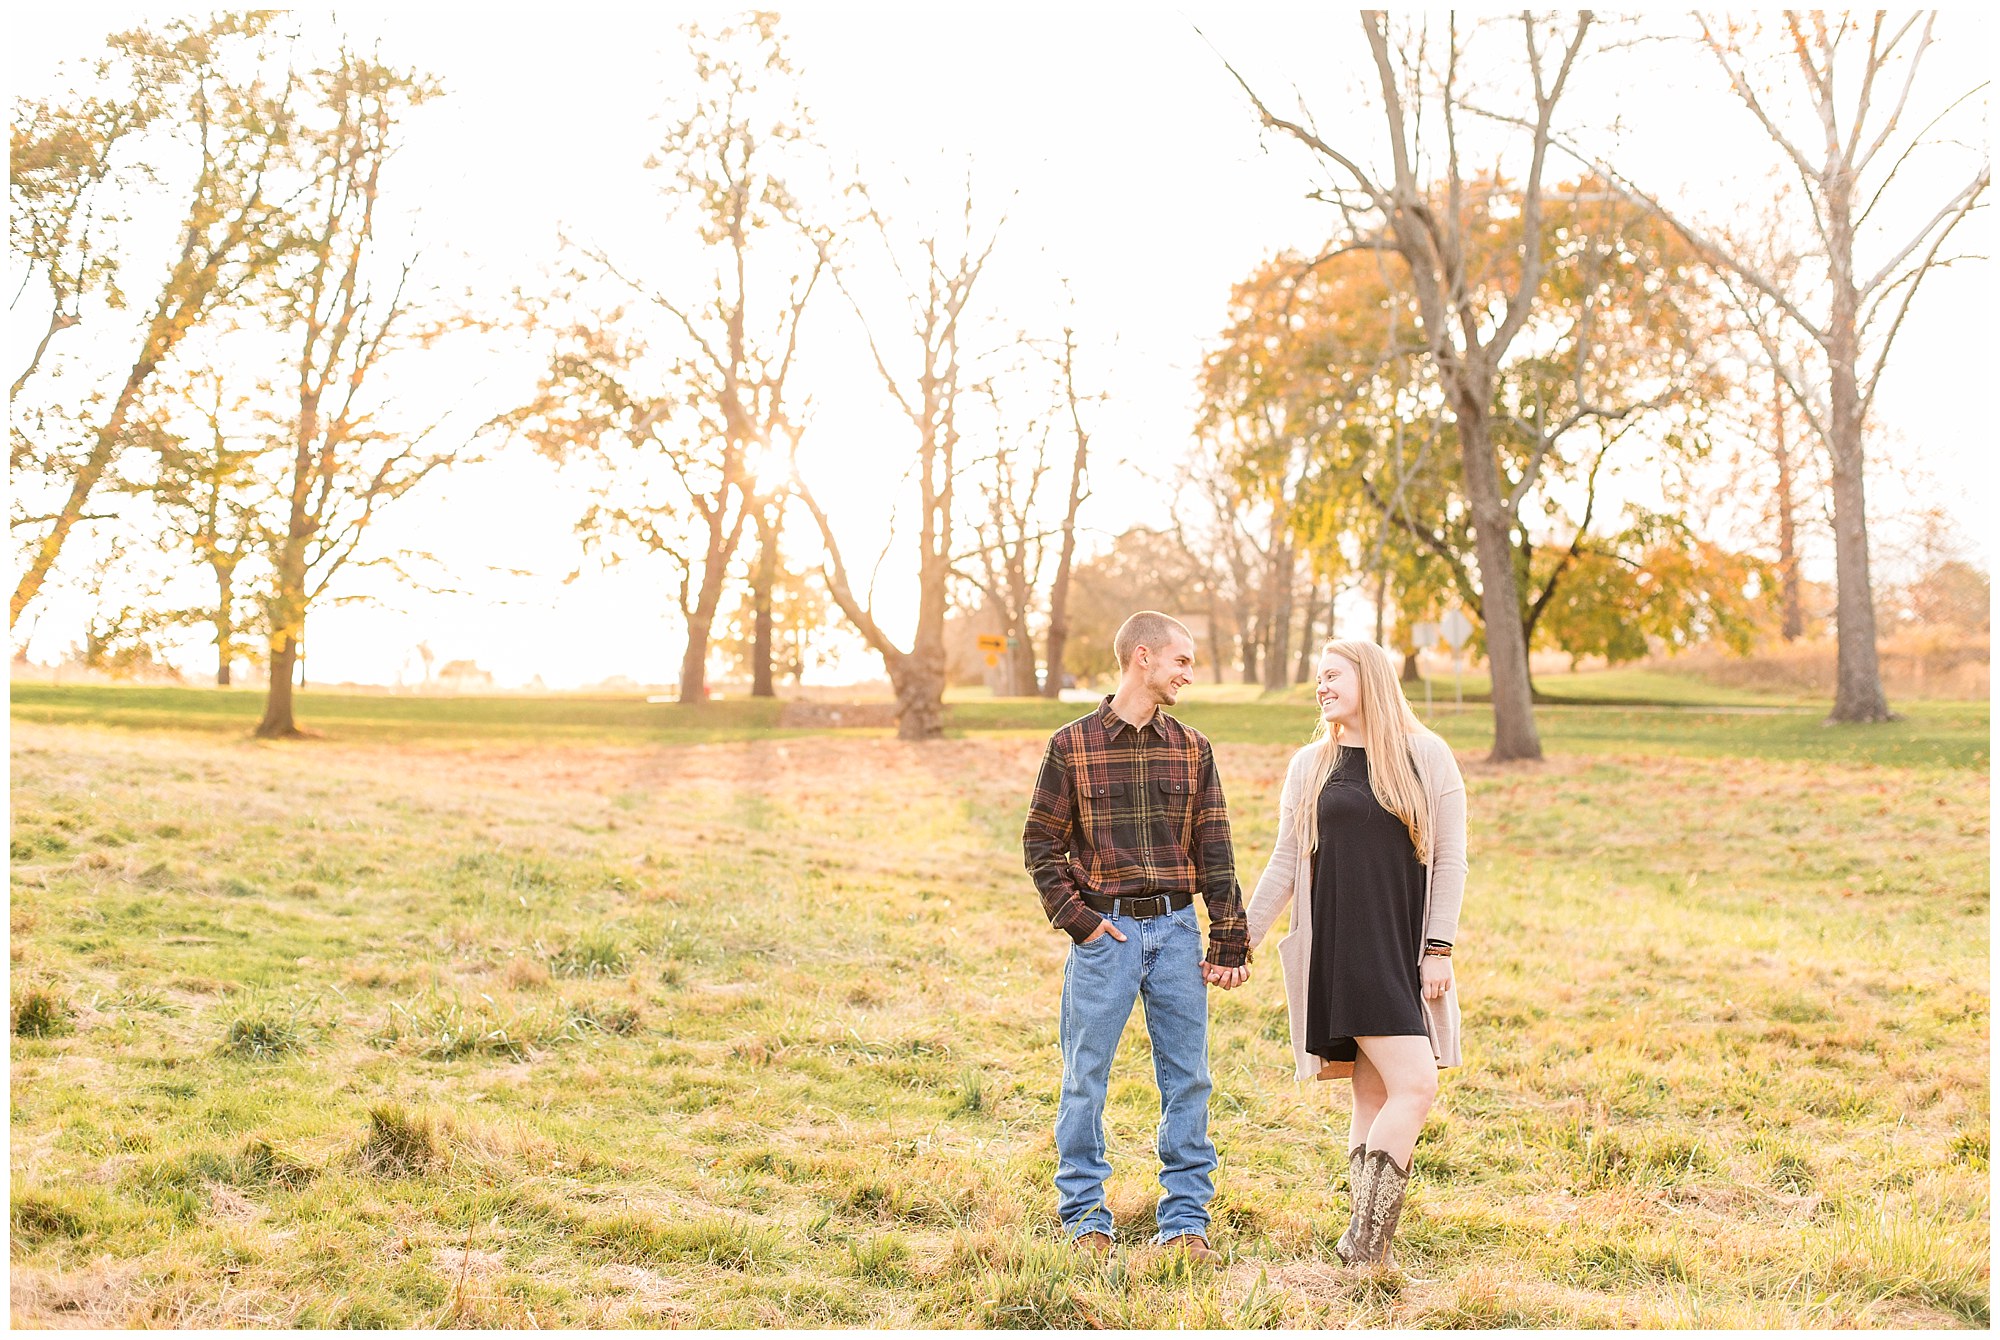 Sheldon & Stephanie's Country Fall Engagement Session at Valley Forge Park Photos